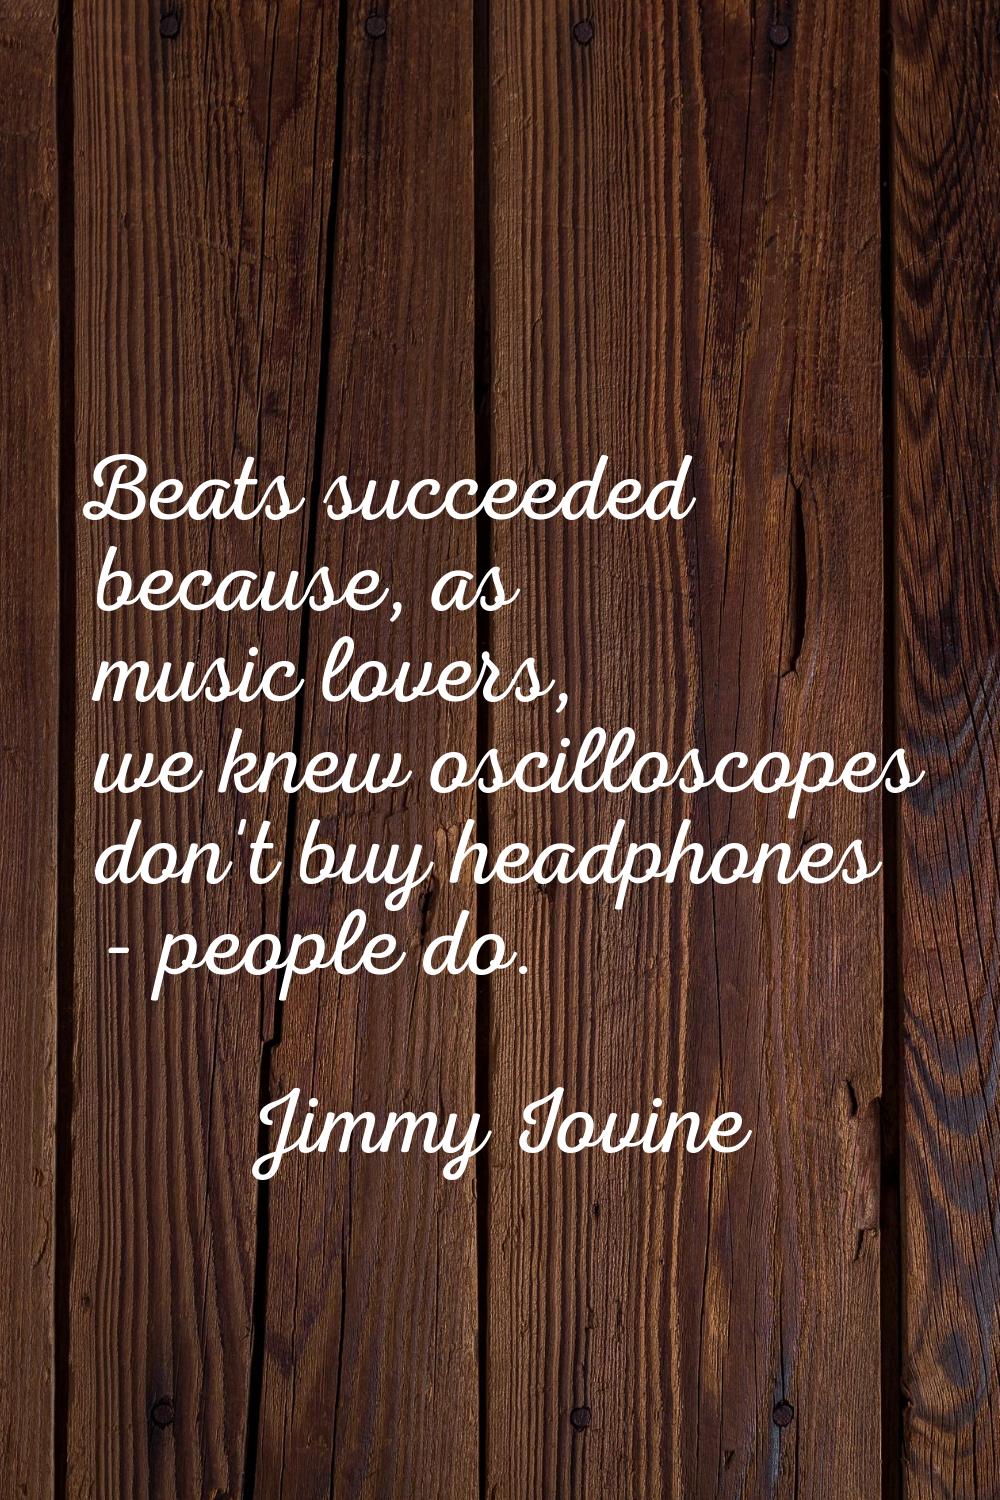 Beats succeeded because, as music lovers, we knew oscilloscopes don't buy headphones - people do.